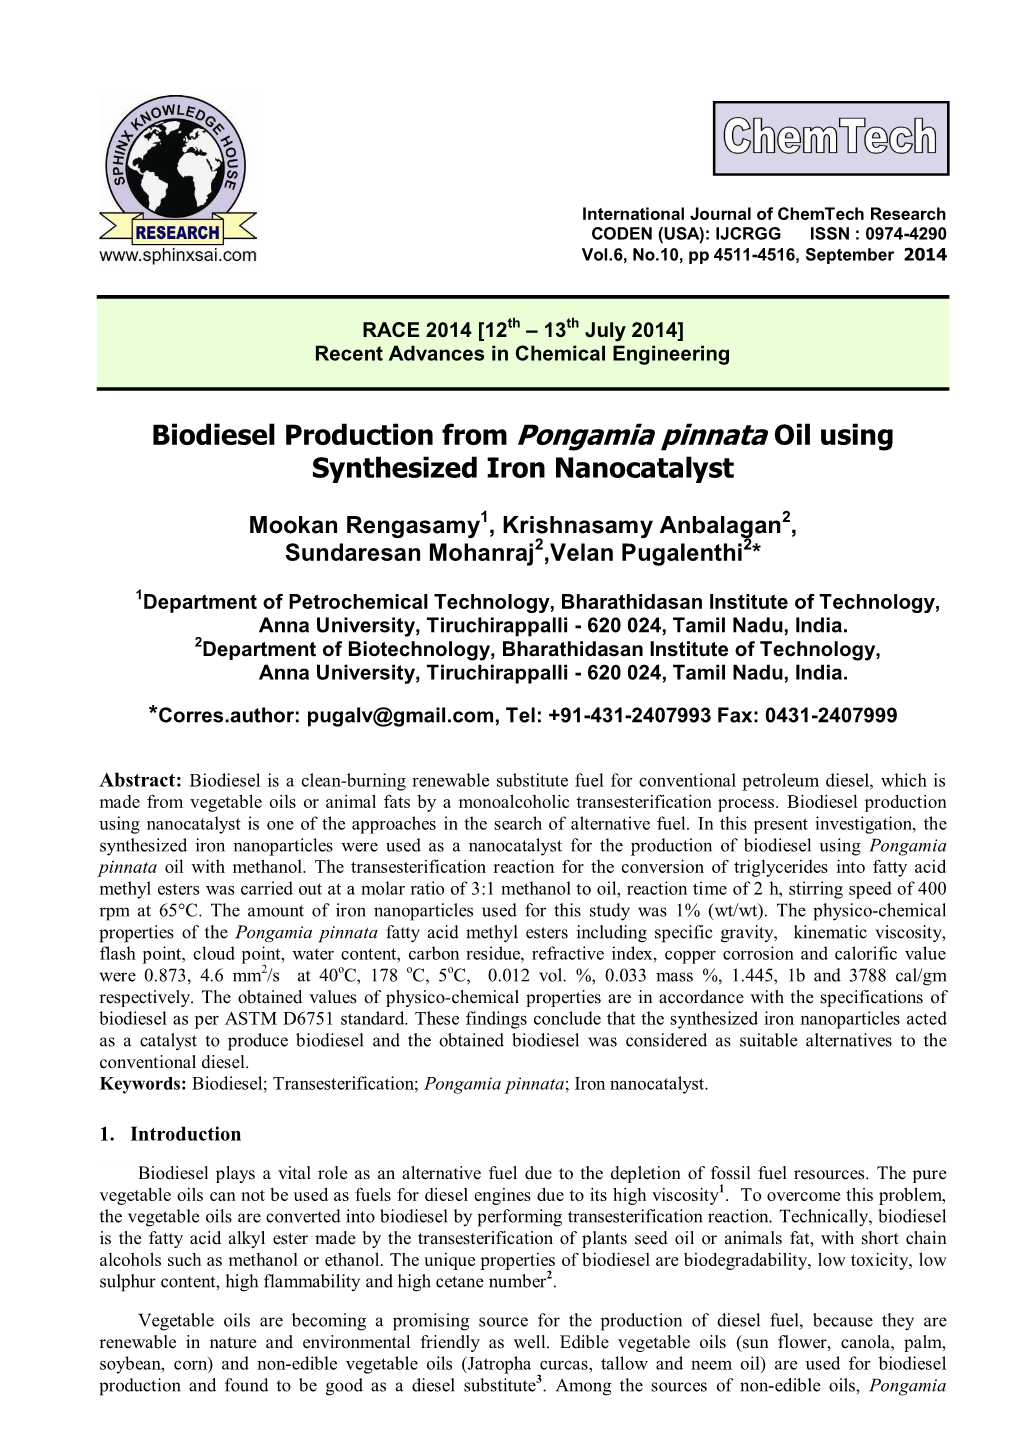 Biodiesel Production from Pongamia Pinnata Oil Using Synthesized Iron Nanocatalyst